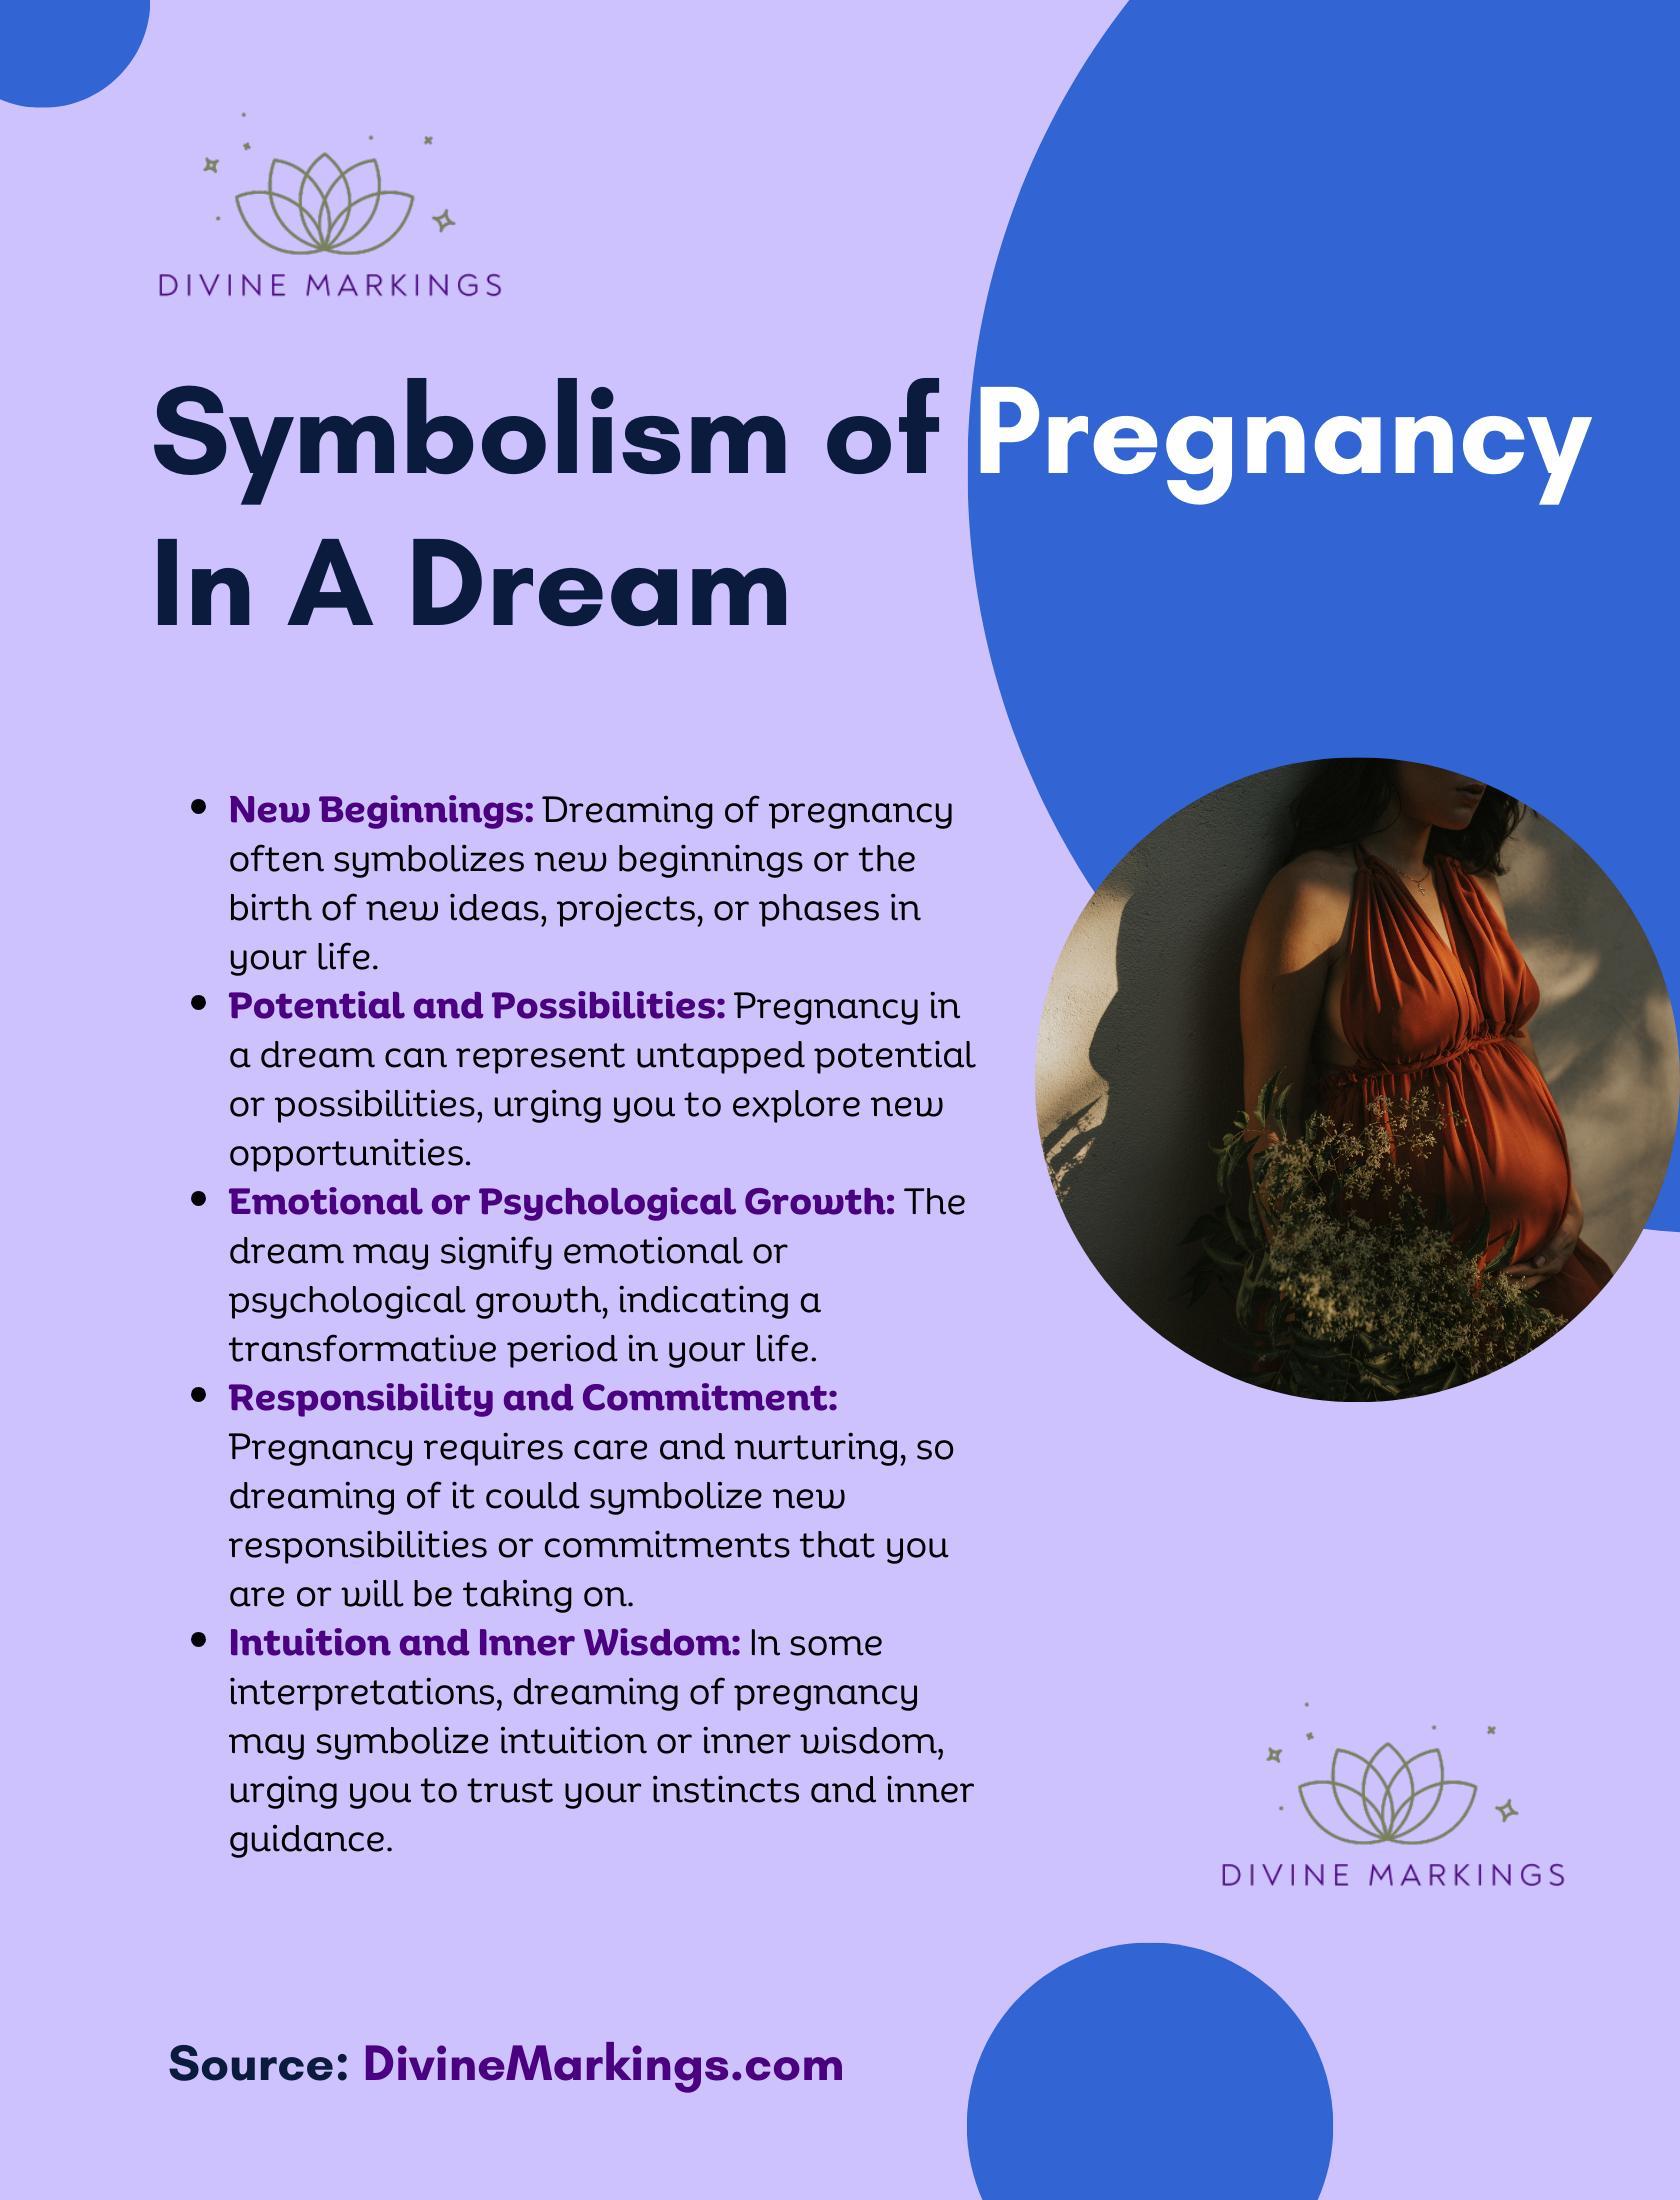 Symbolism of Pregnancy In A Dream Infographic